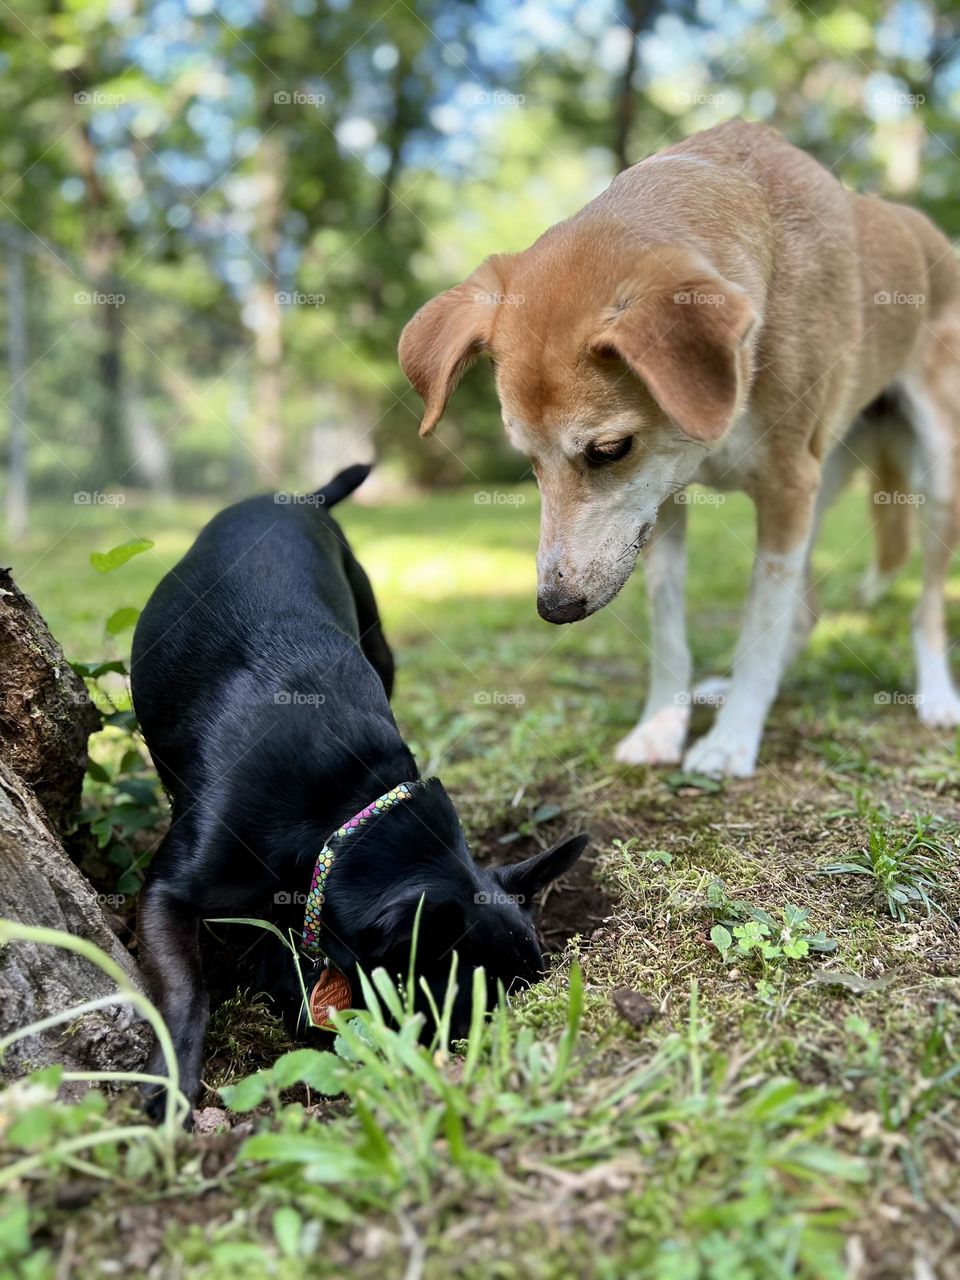 Small black dog digging a hole chasing prey. Larger tan and white dog attentively waits for a turn.